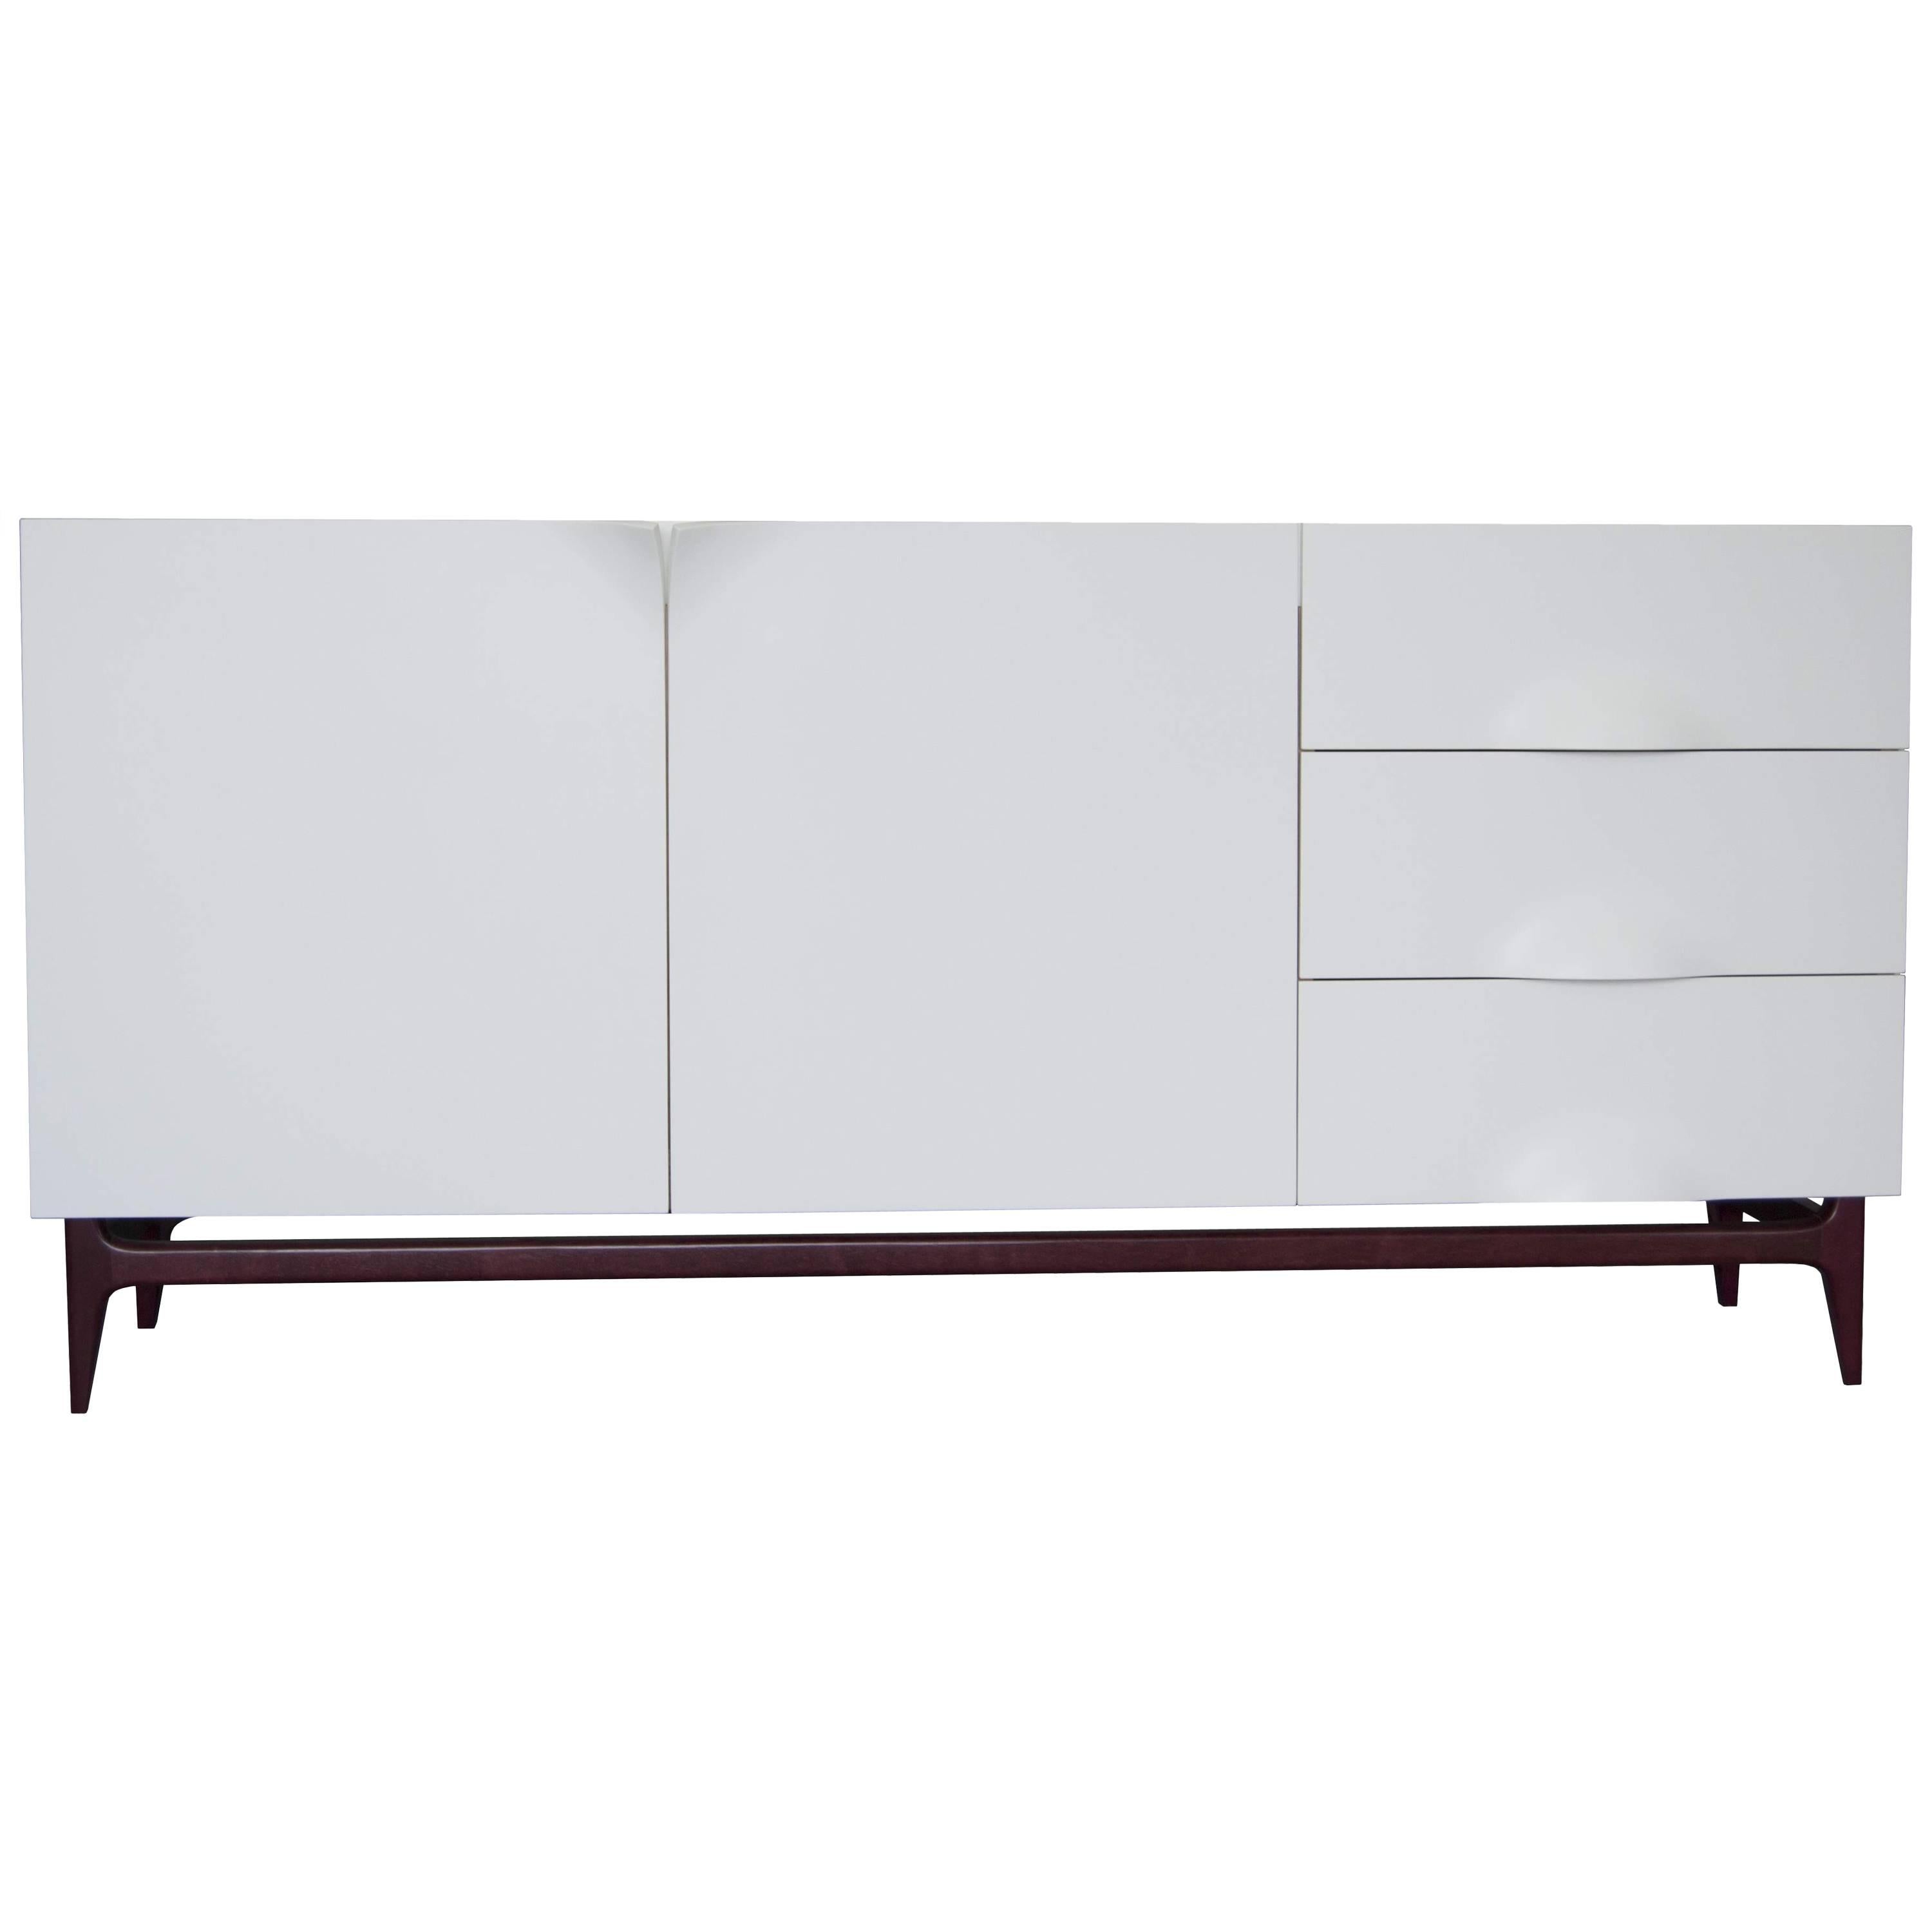 Folio Sideboard, Corian and Amarante Sideboard by Paul-Bertrand Mathieu For Sale